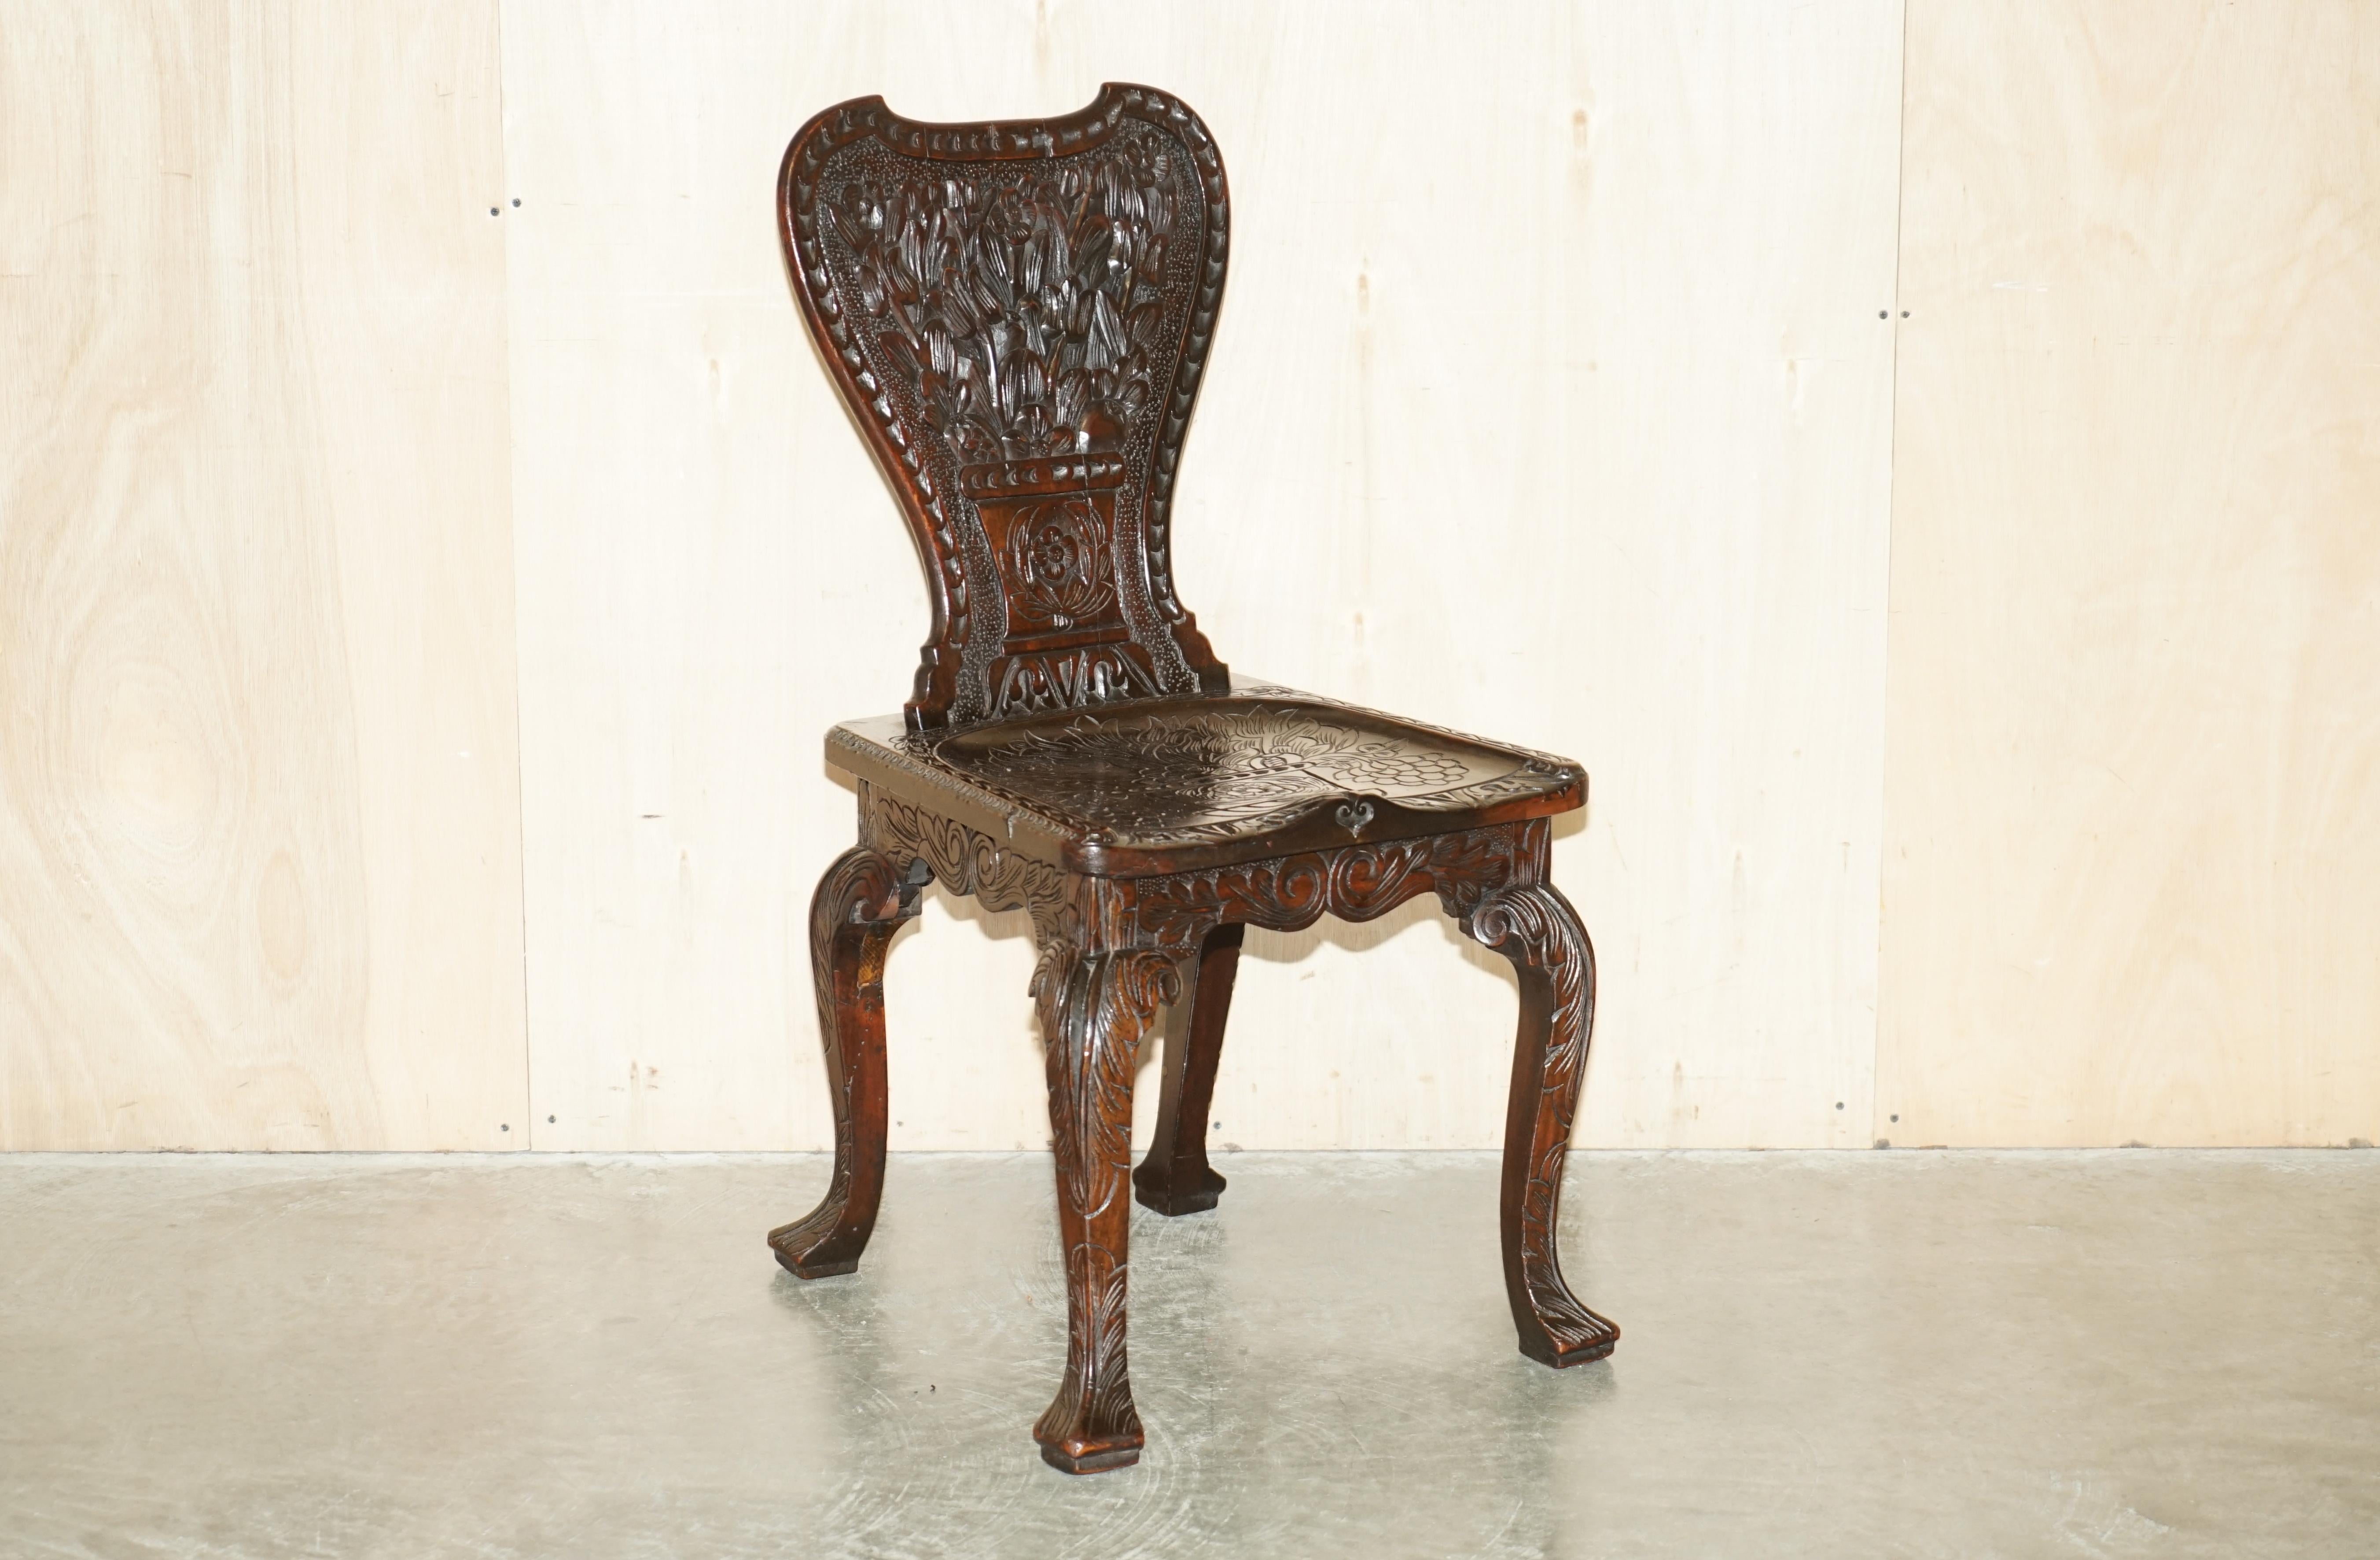 Royal House Antiques

Royal House Antiques is delighted to offer for sale this stunning original Victorian circa 1860-1880, ornately hand carved Colonial Hall chair which is super decorative 

Please note the delivery fee listed is just a guide, it